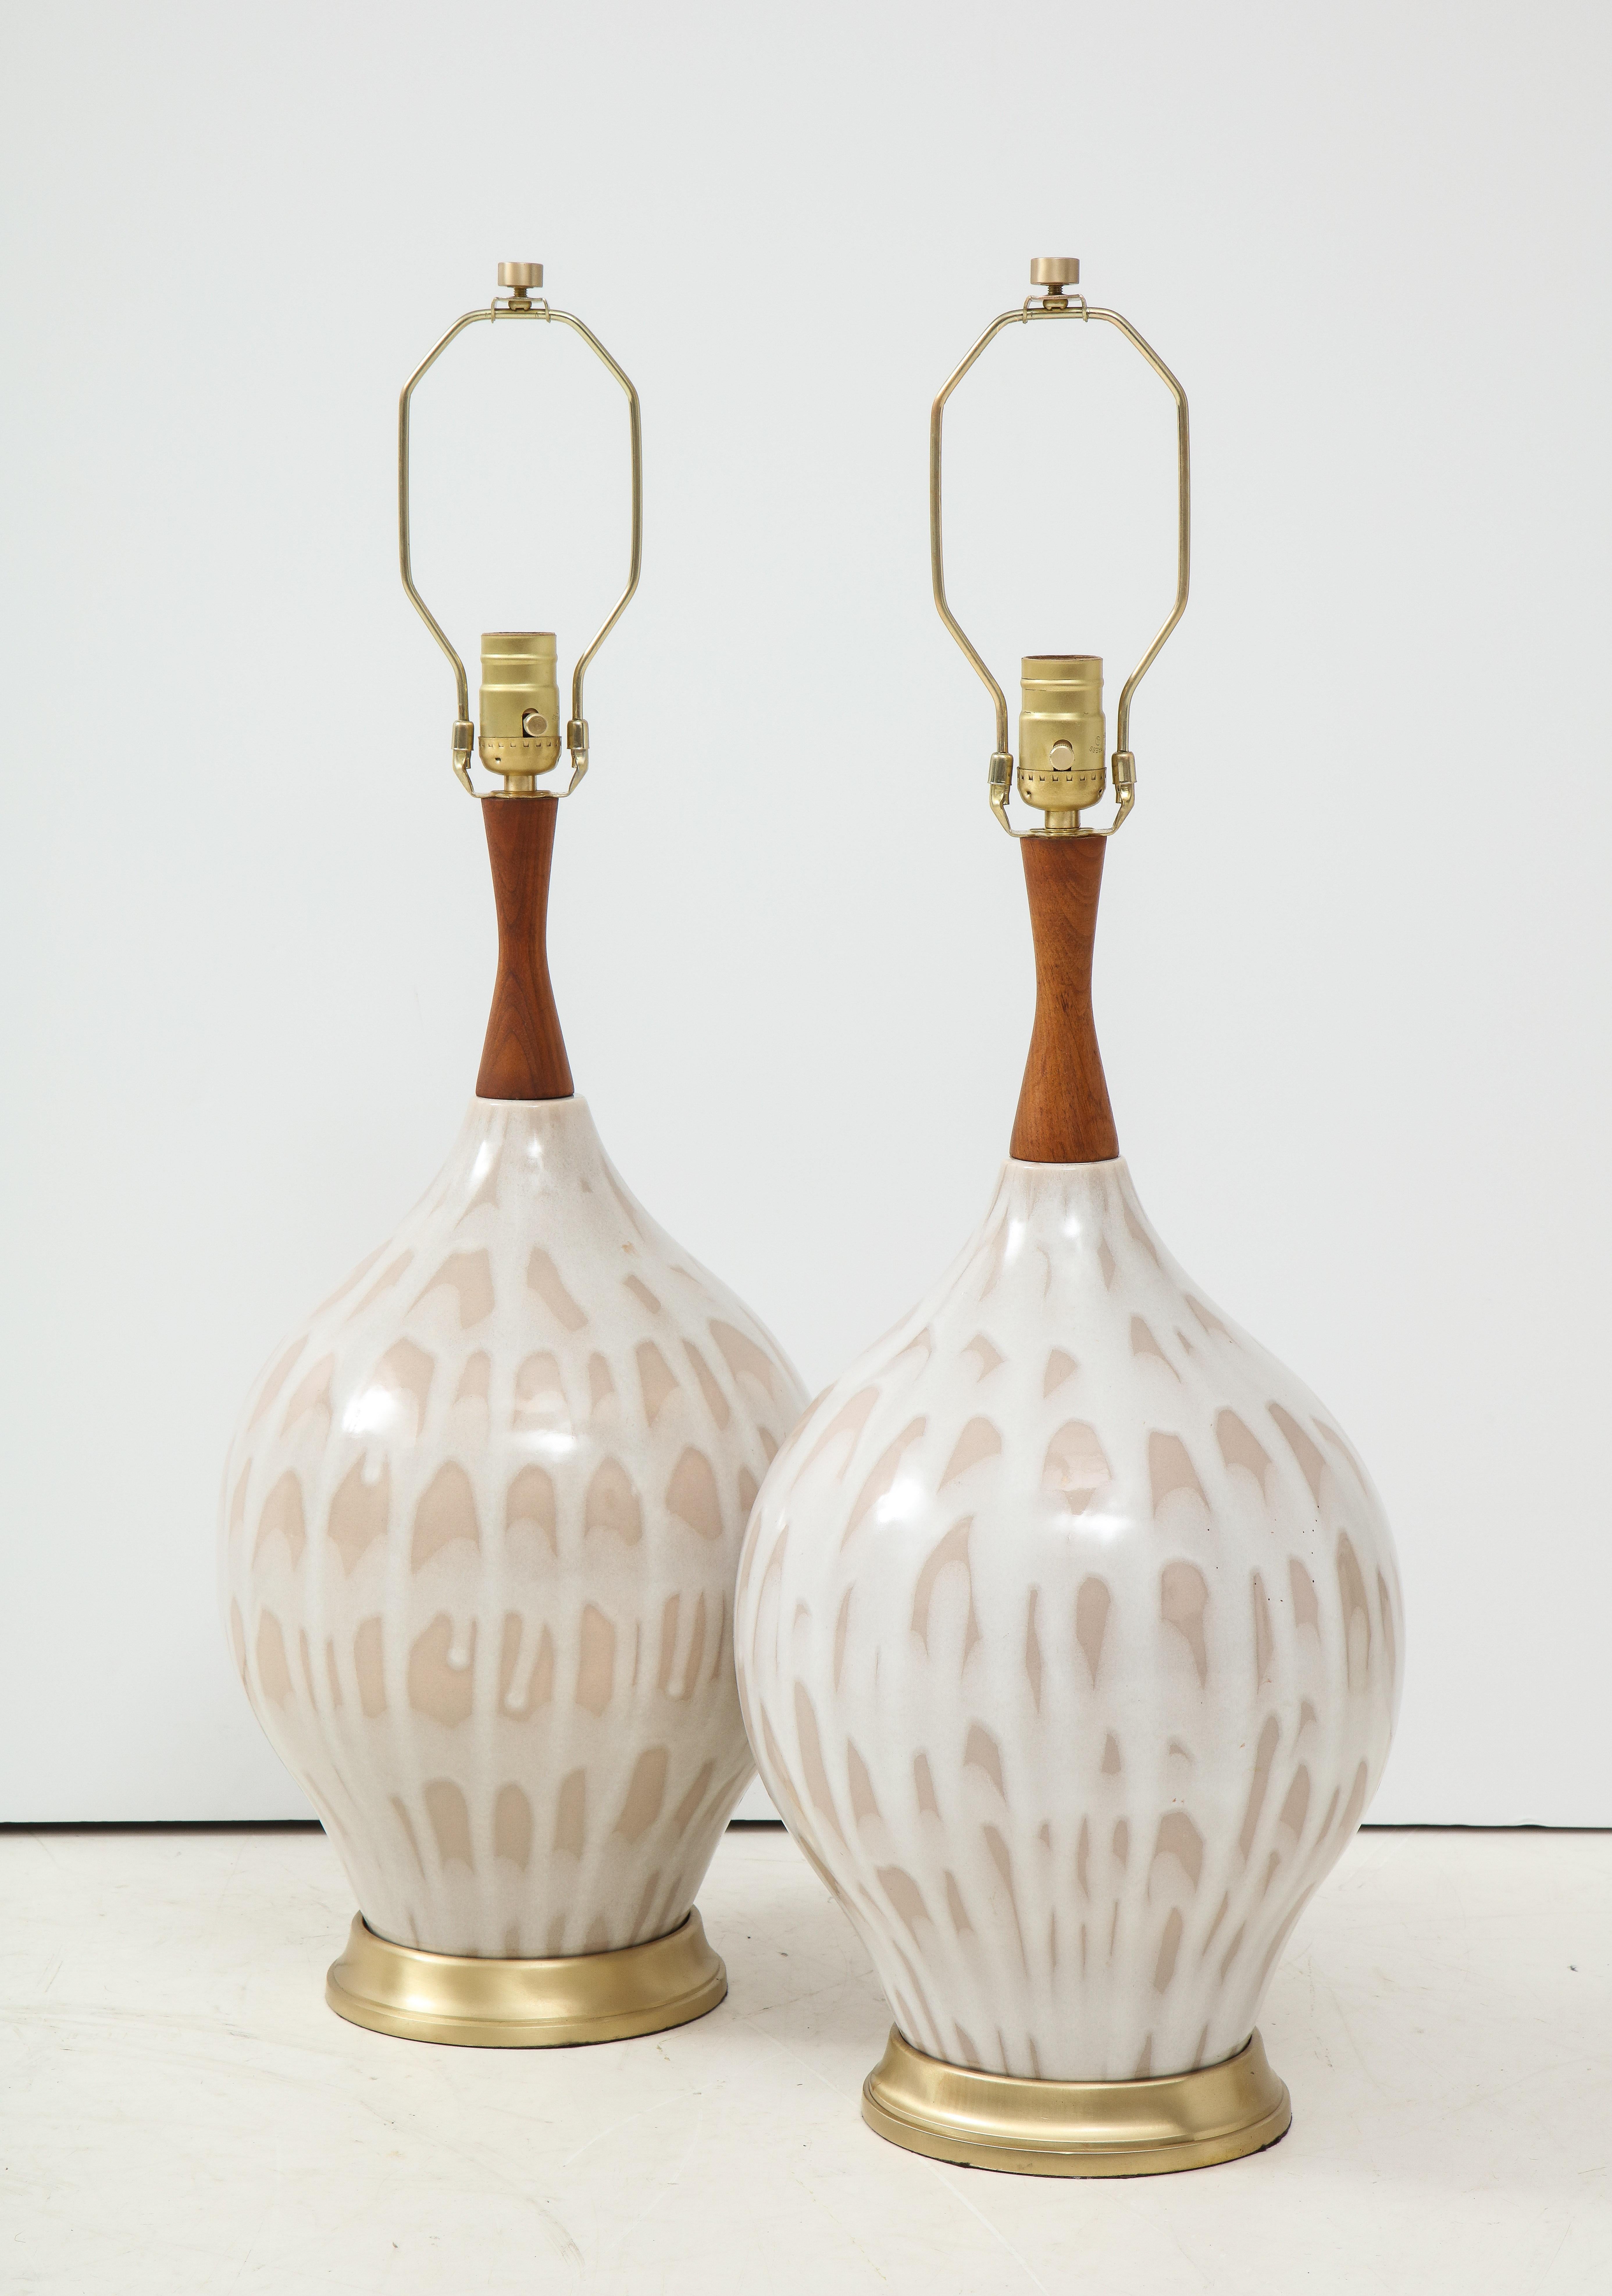 Pair of midcentury ceramic lamps featuring a matte cream and taupe glaze and walnut spindle necks, on brushed brass bases. Rewired for use in the USA, 100W max.